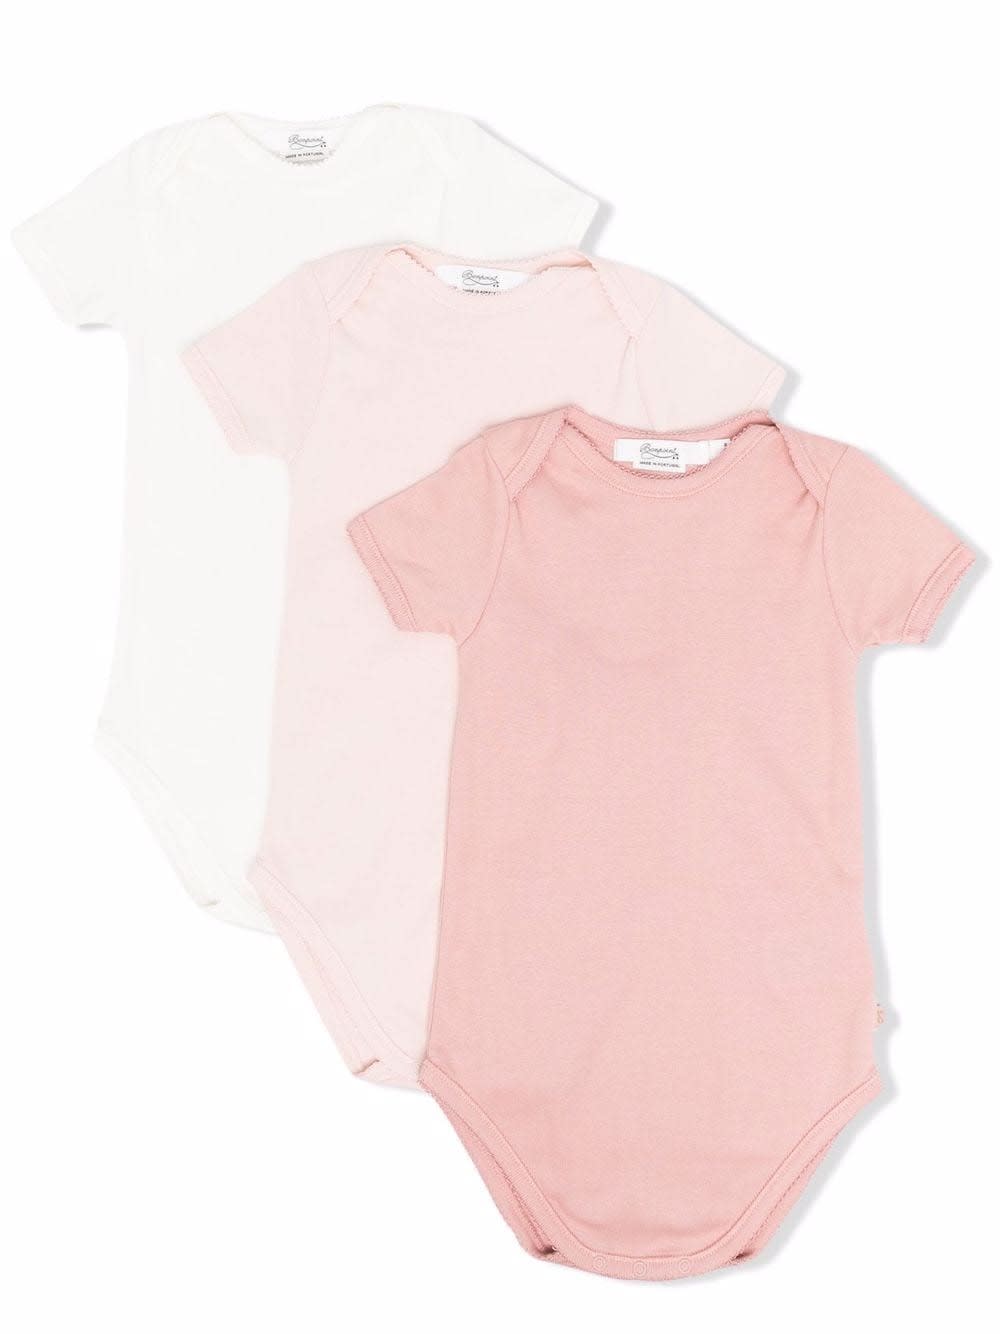 Bonpoint Babies' 3 Body Pack In Pink And White Cotton